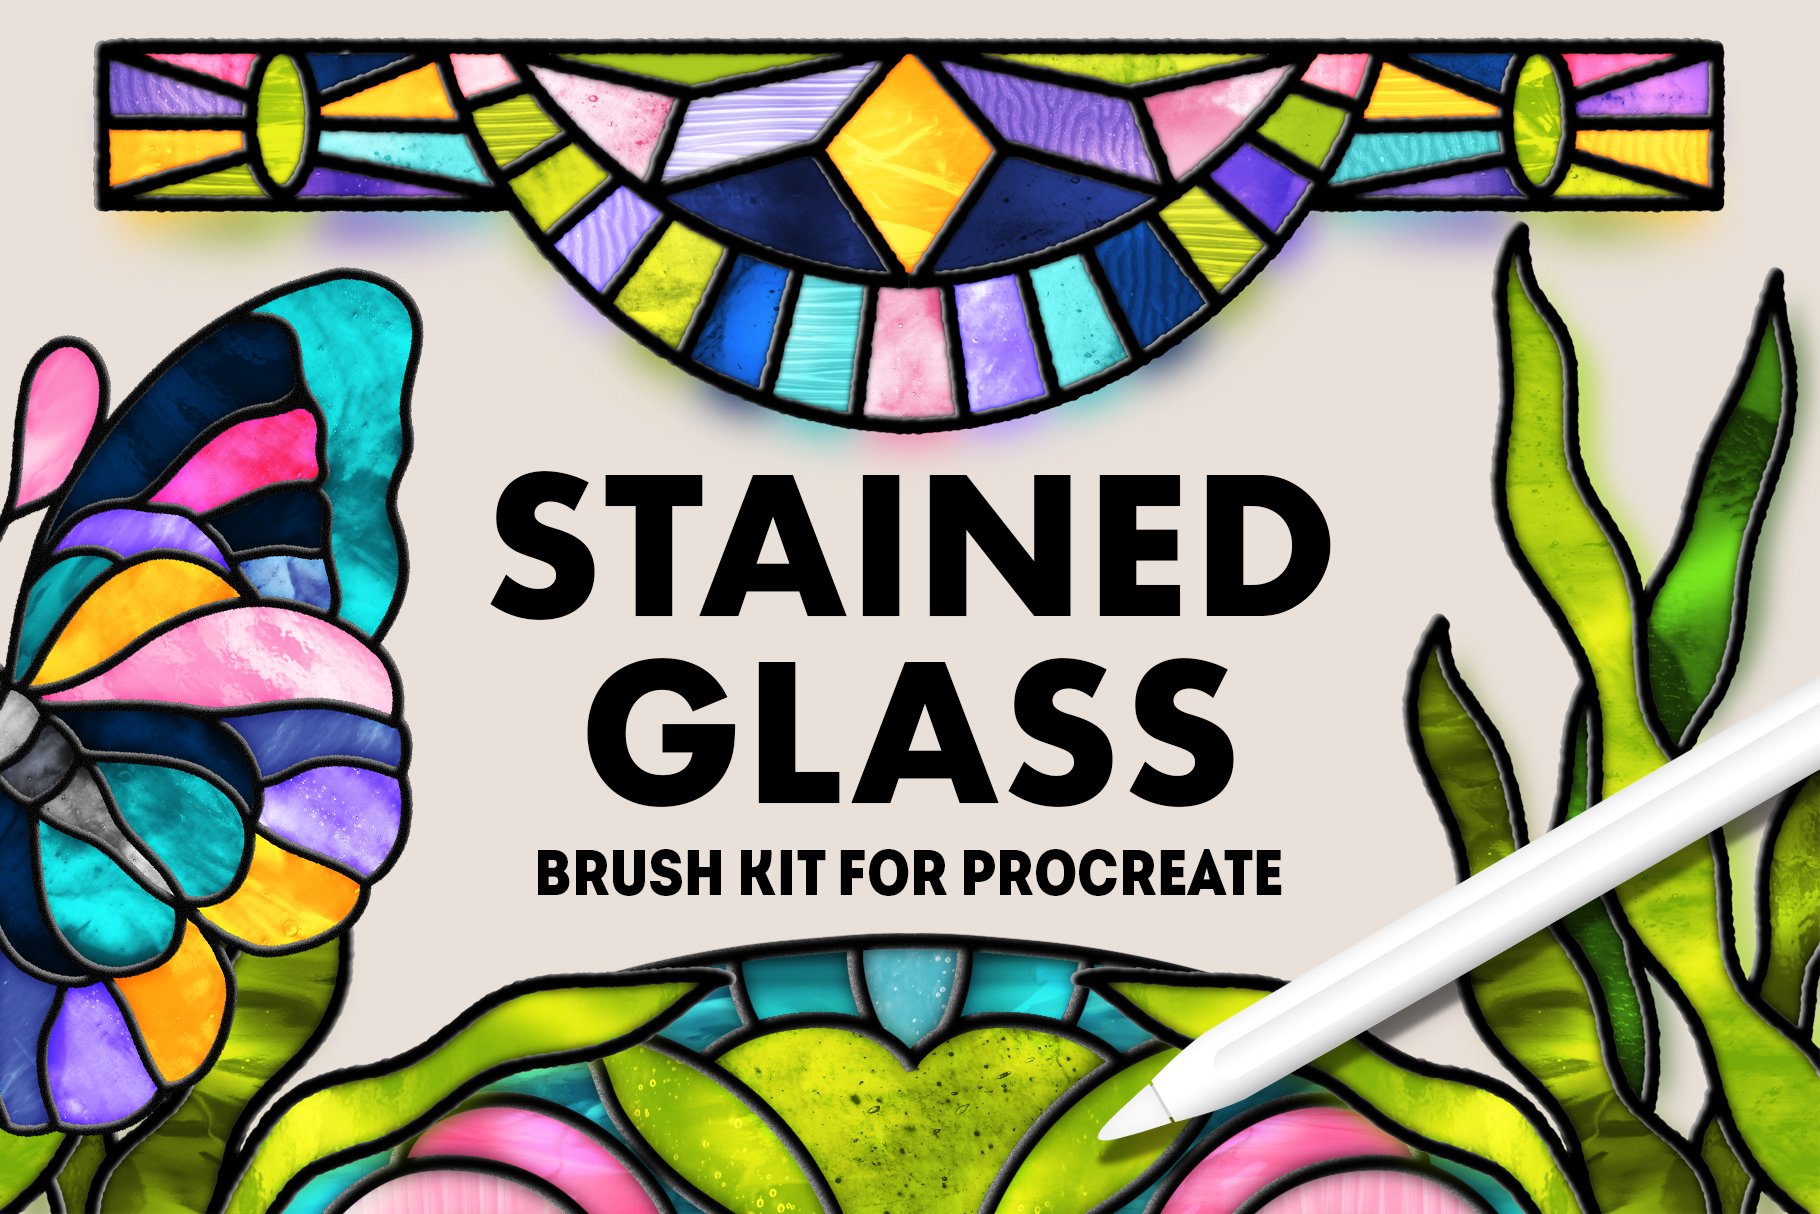 Stain Brushes